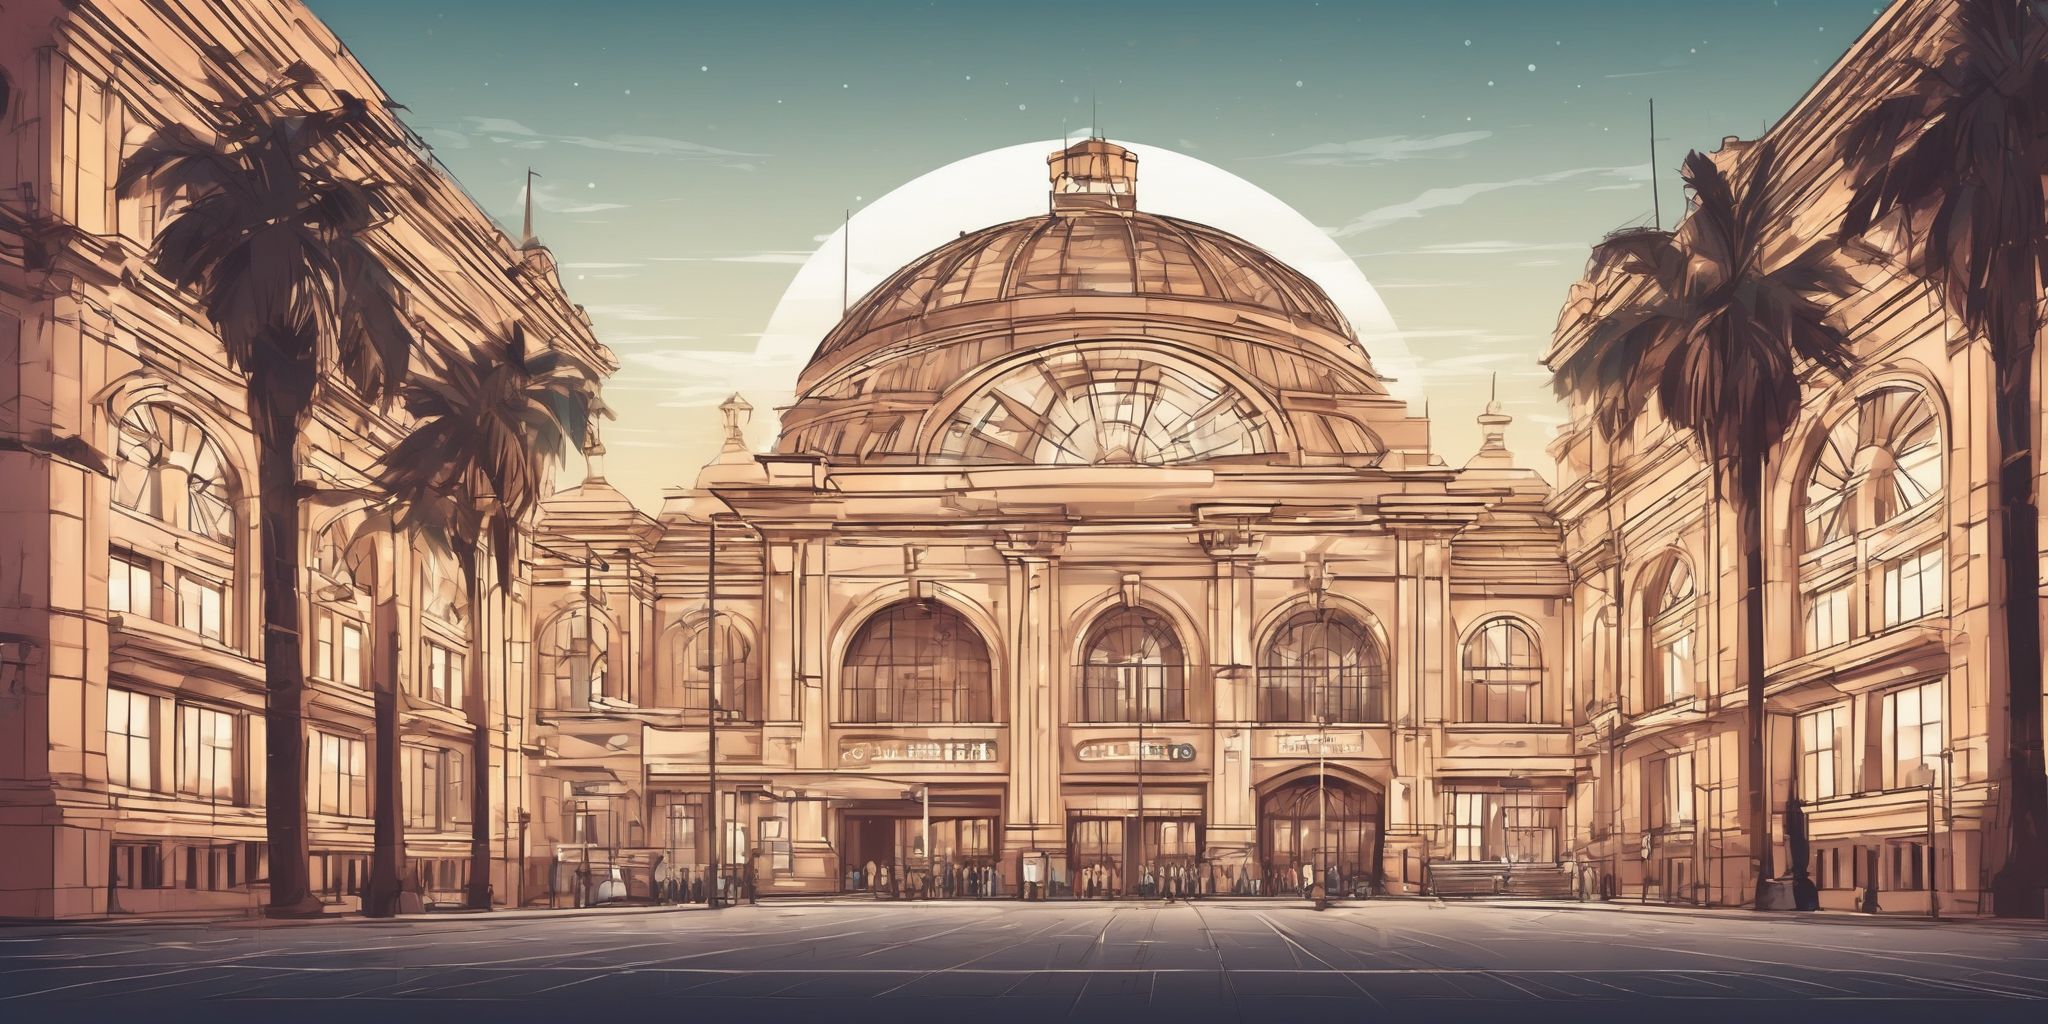 central station in illustration style with gradients and white background